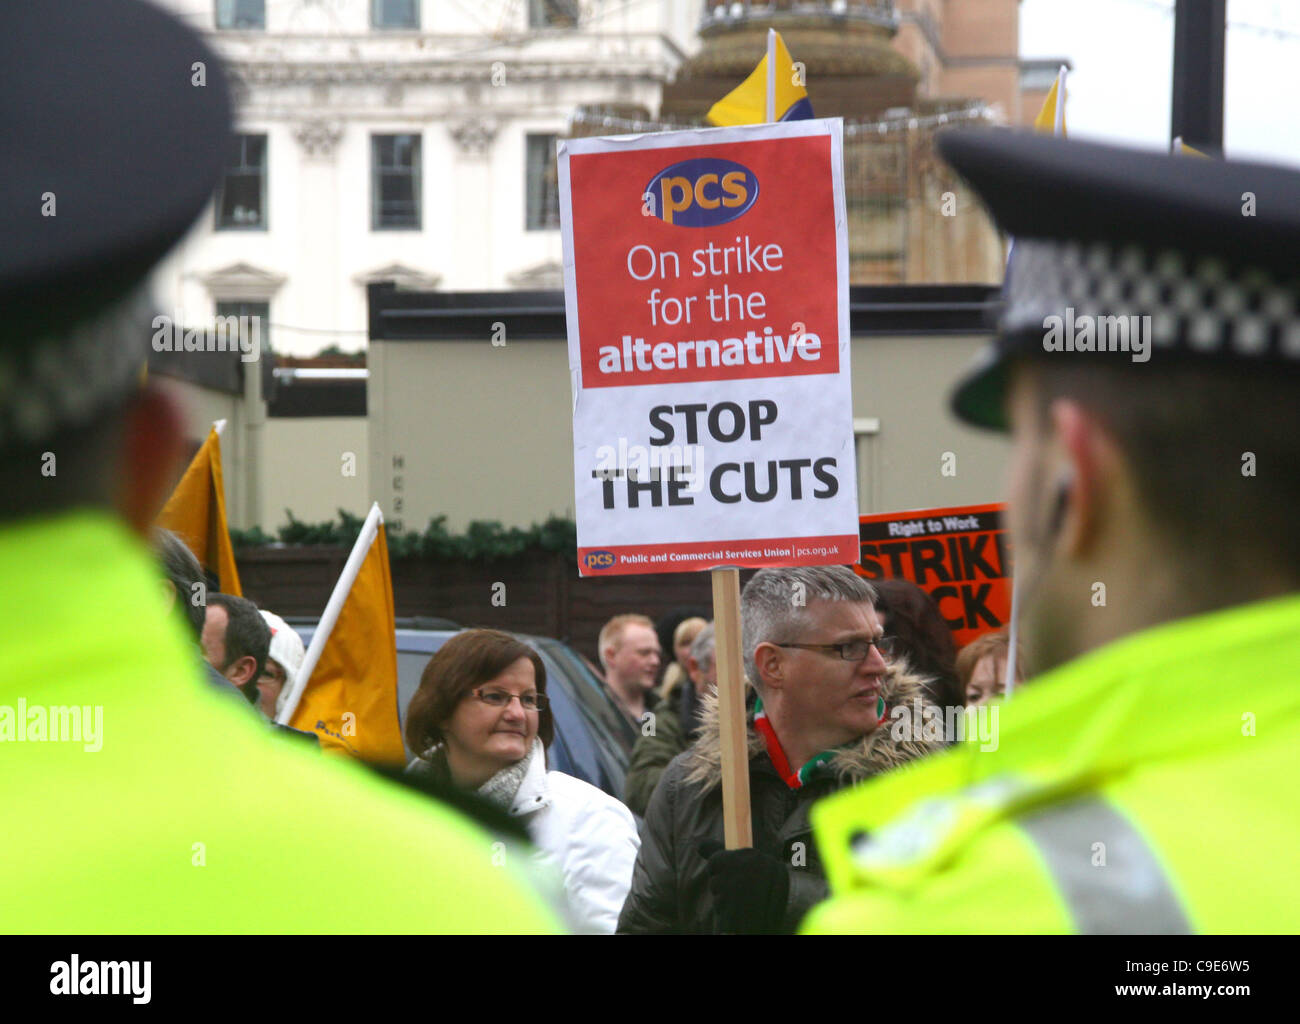 30/11/11 Day of action Glasgow.  Public service unions protest against pension reforms. Stock Photo